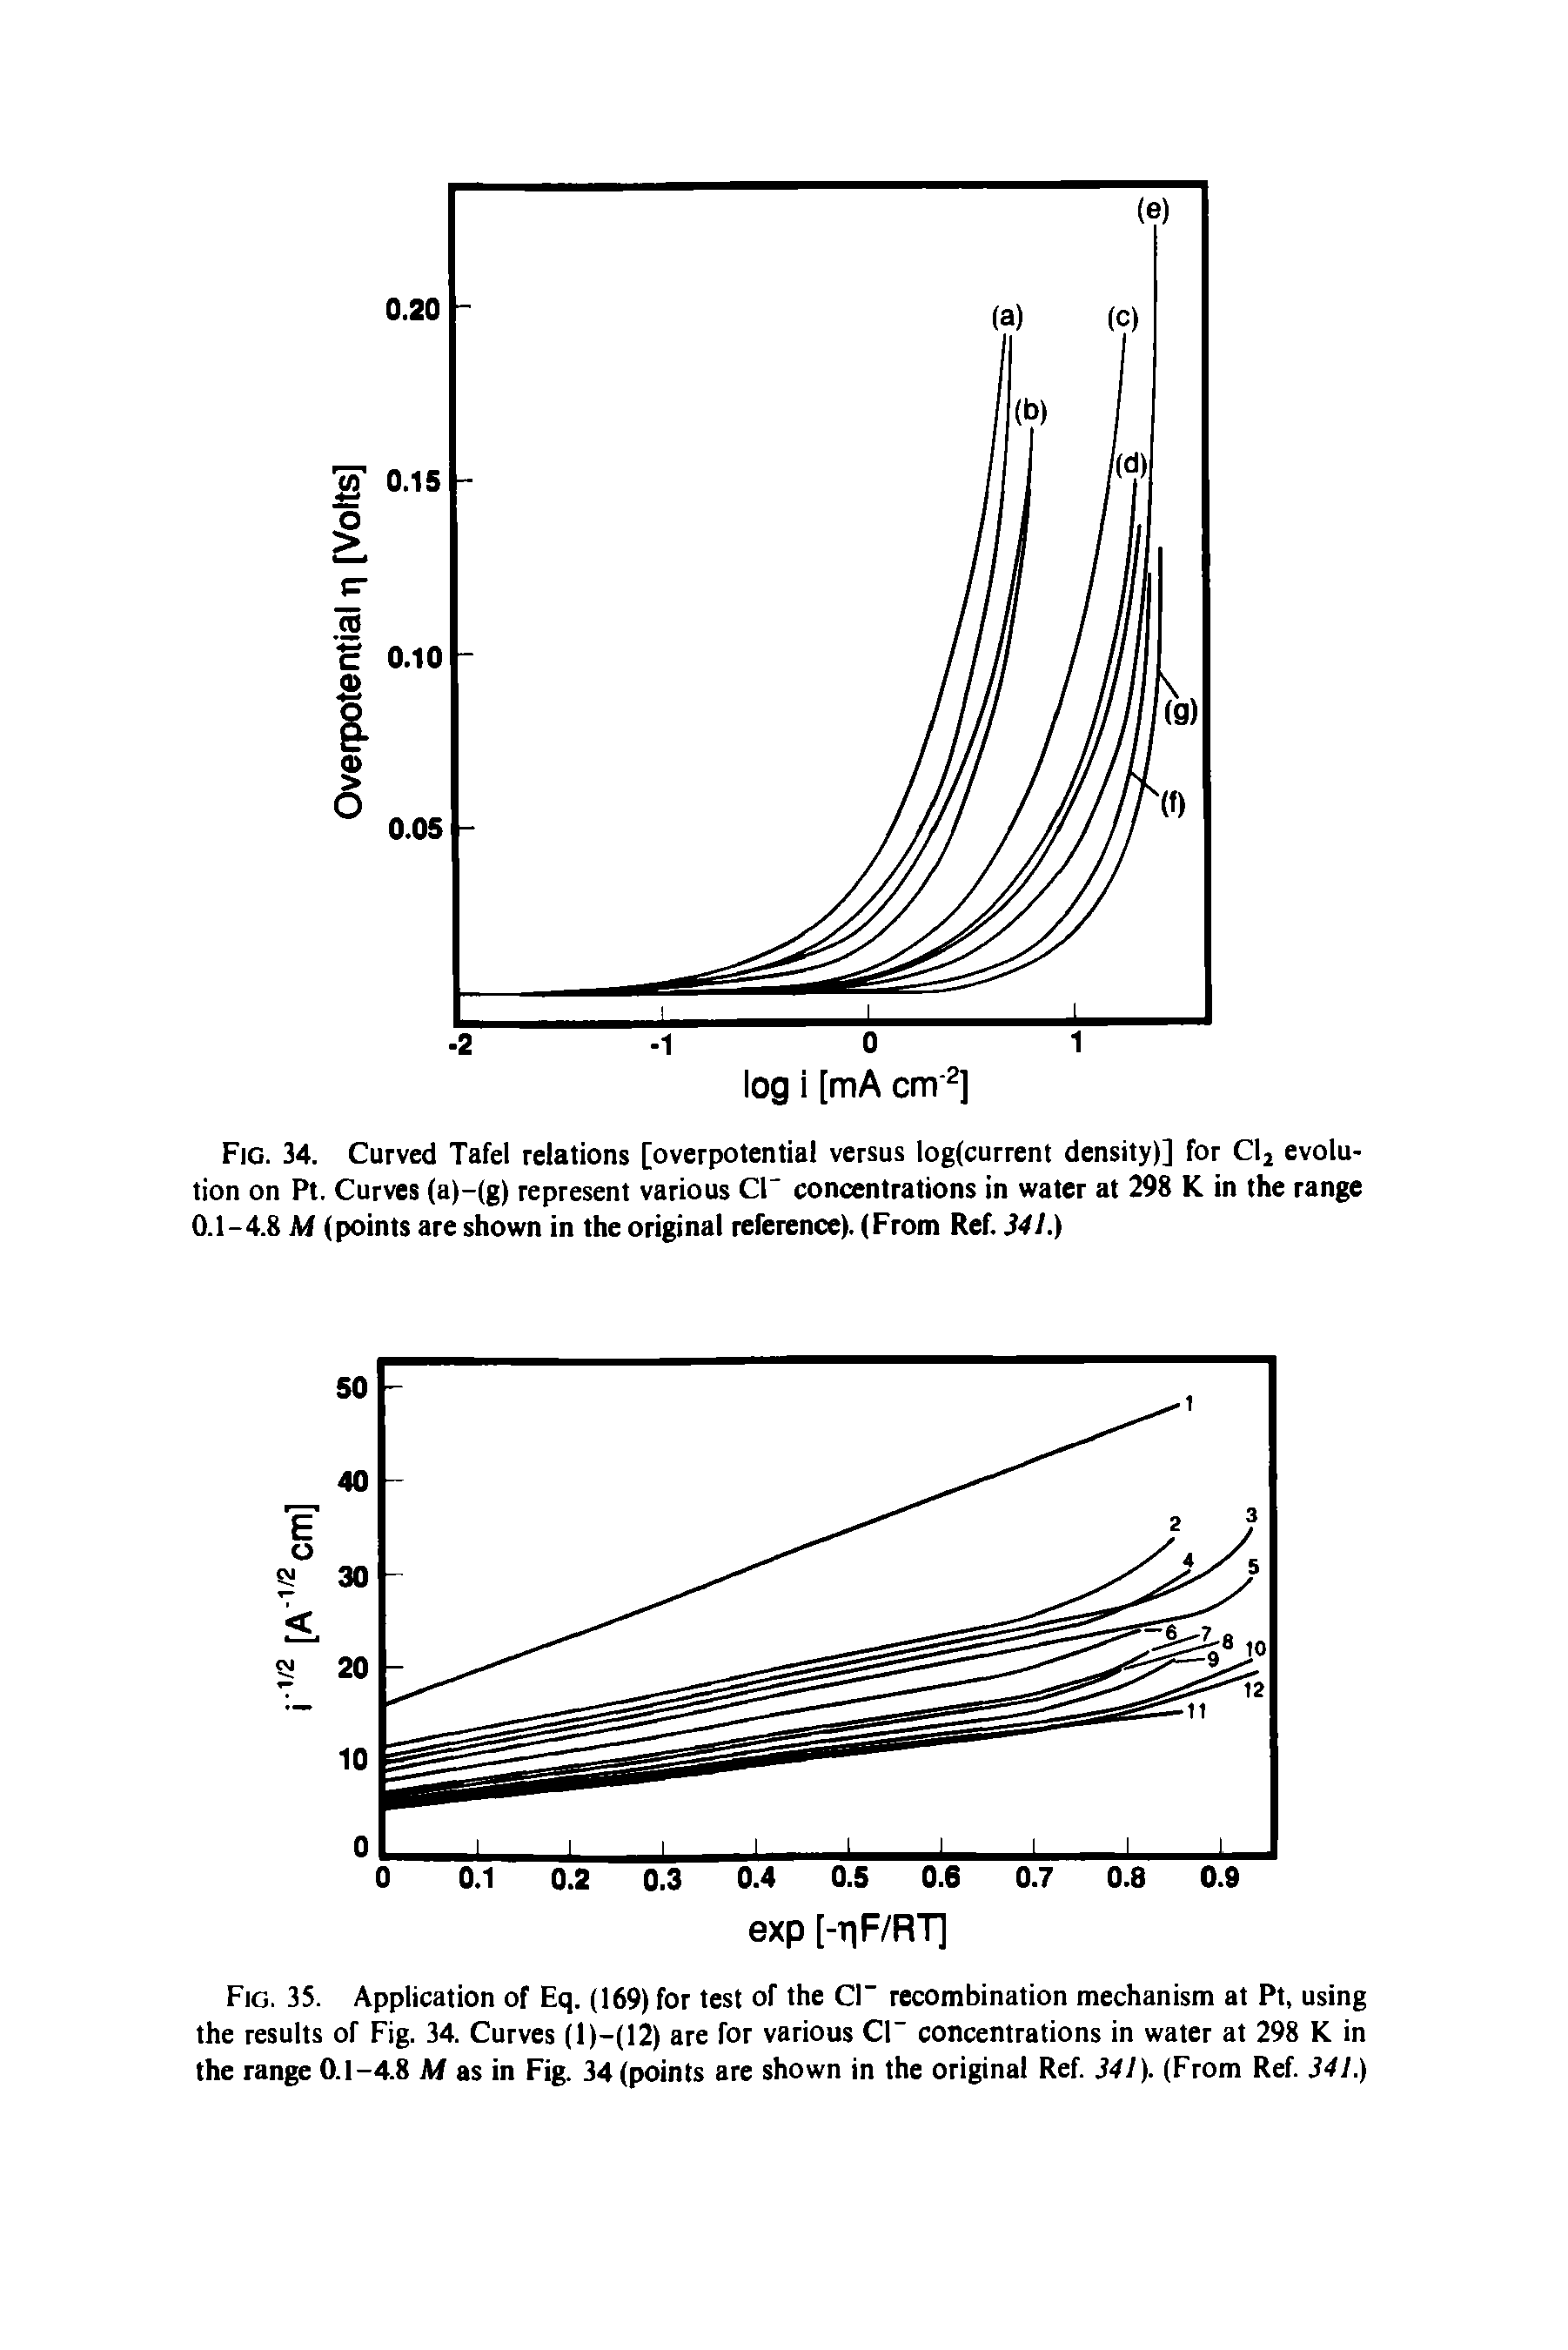 Fig. 34. Curved Tafel relations [overpotential versus log(current density)] for Clj evolution on Pt. Curves (a)-(g) represent various cr concentrations in water at 298 K in the range 0.1-4.8 M (points are shown in the original reference). (From Ref. 341.)...